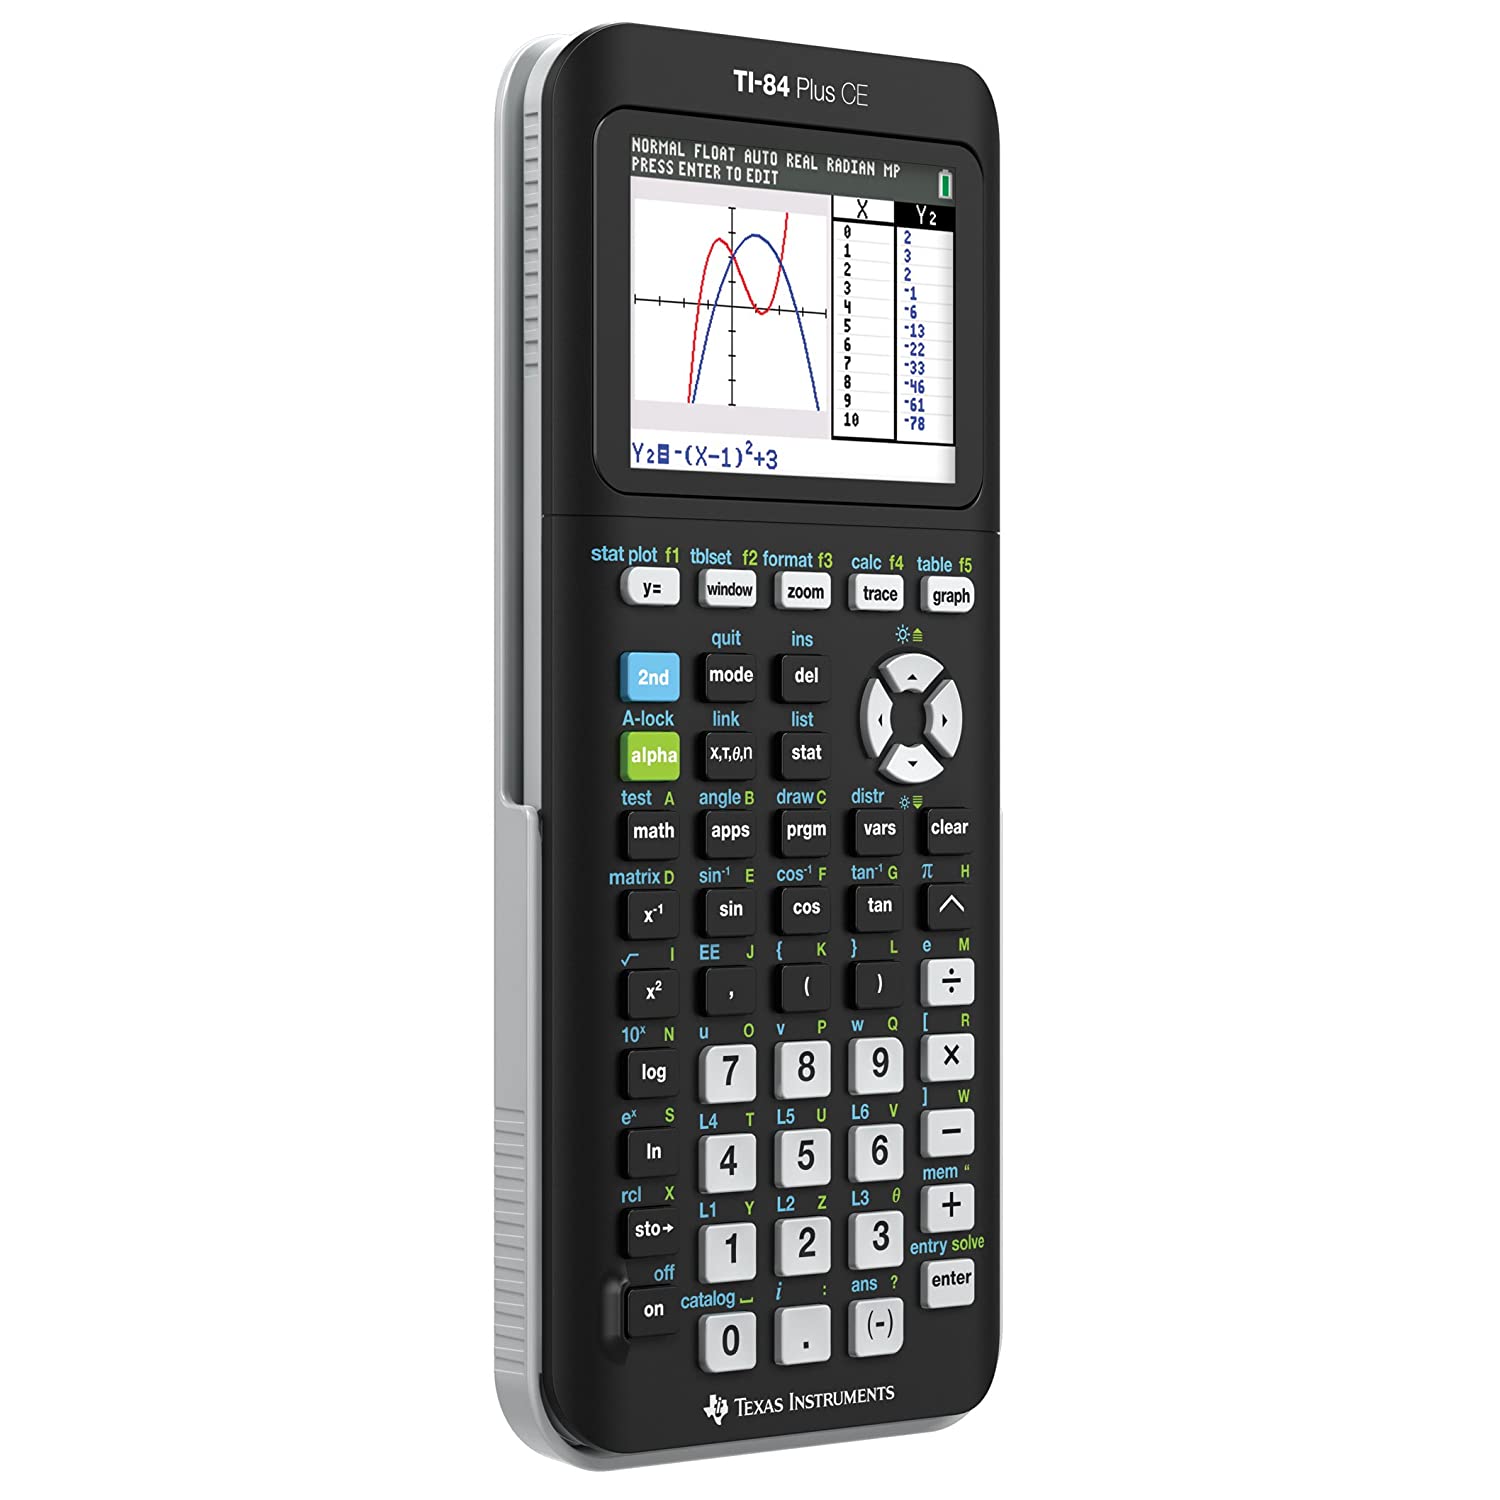 Texas Instruments TI-84 Plus CE Graphing Calculator, Black - image 3 of 5